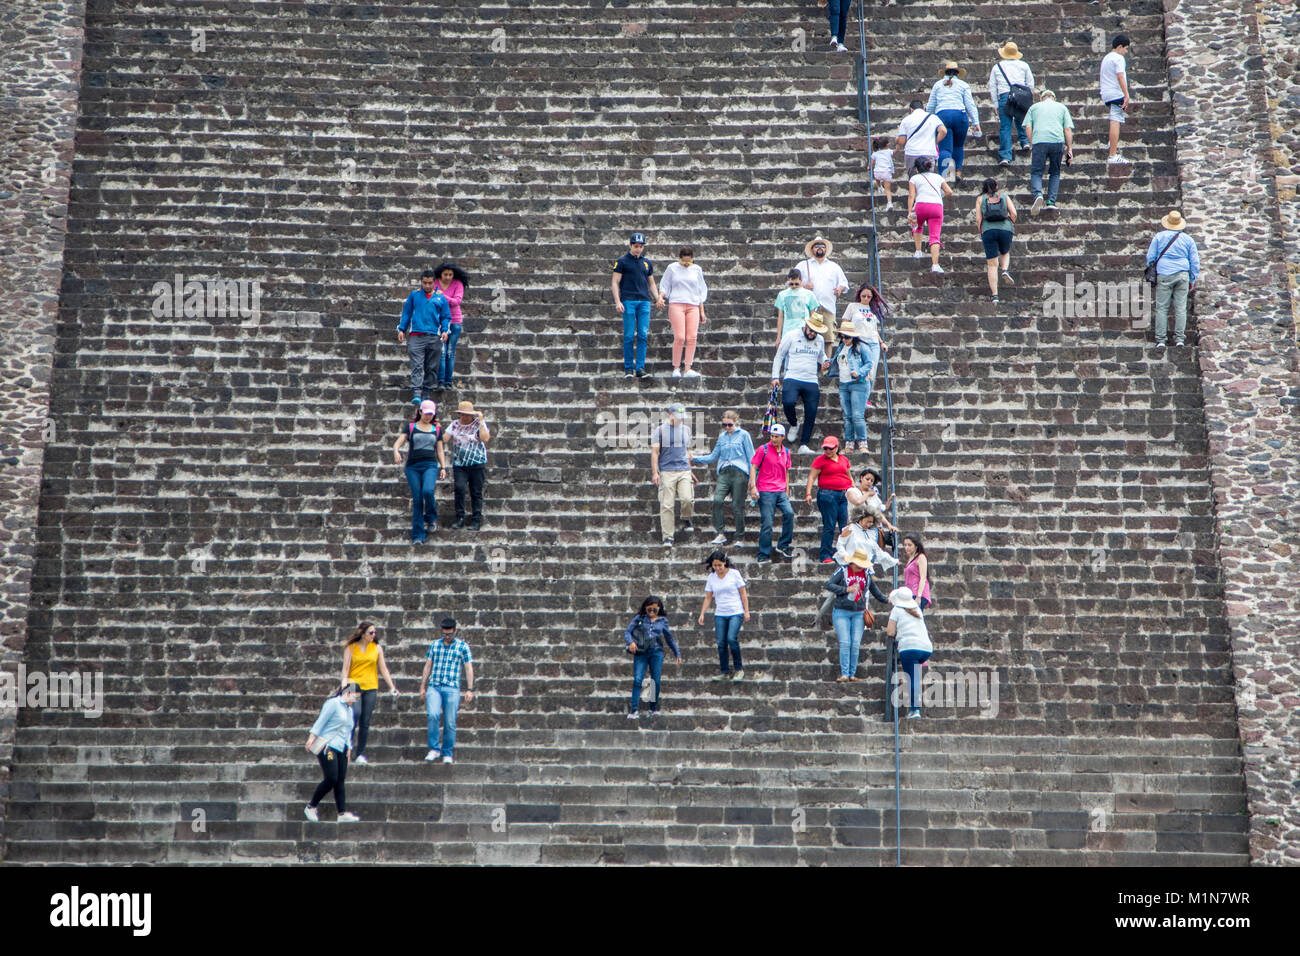 Steep stairs at the Pyramid of the Sun, Teotihuacán, Mexico City, Mexico Stock Photo